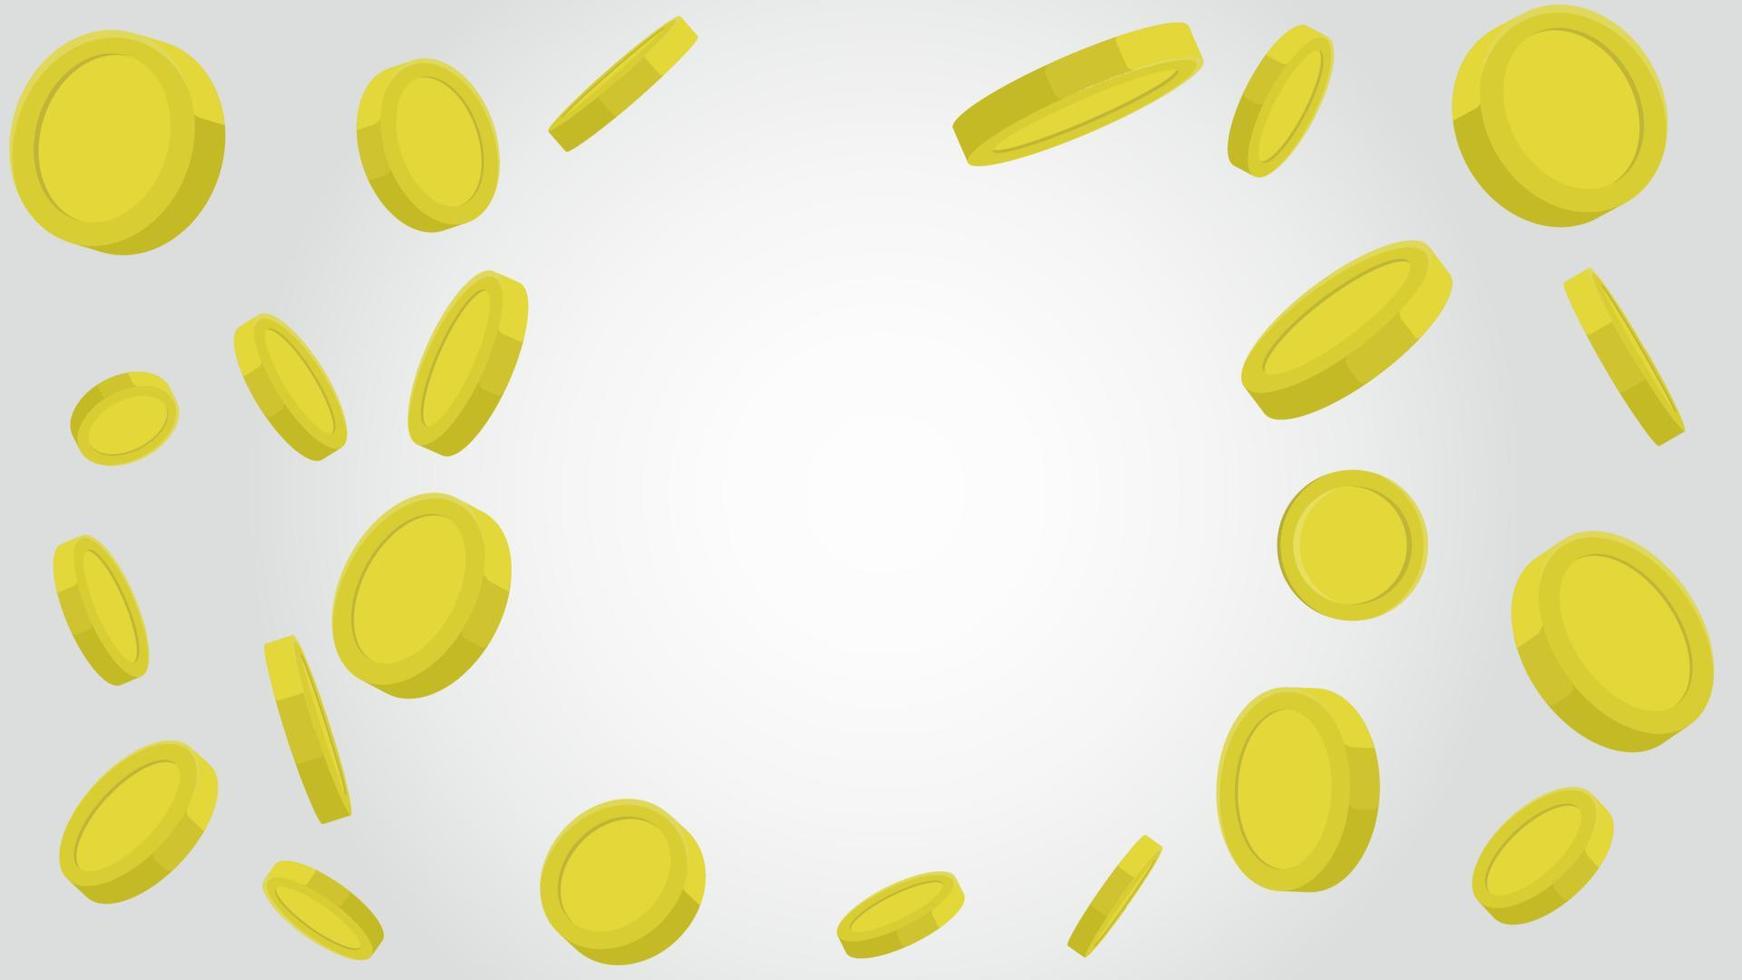 Flying golden coins on white background with space on center. Vector illustration EPS10